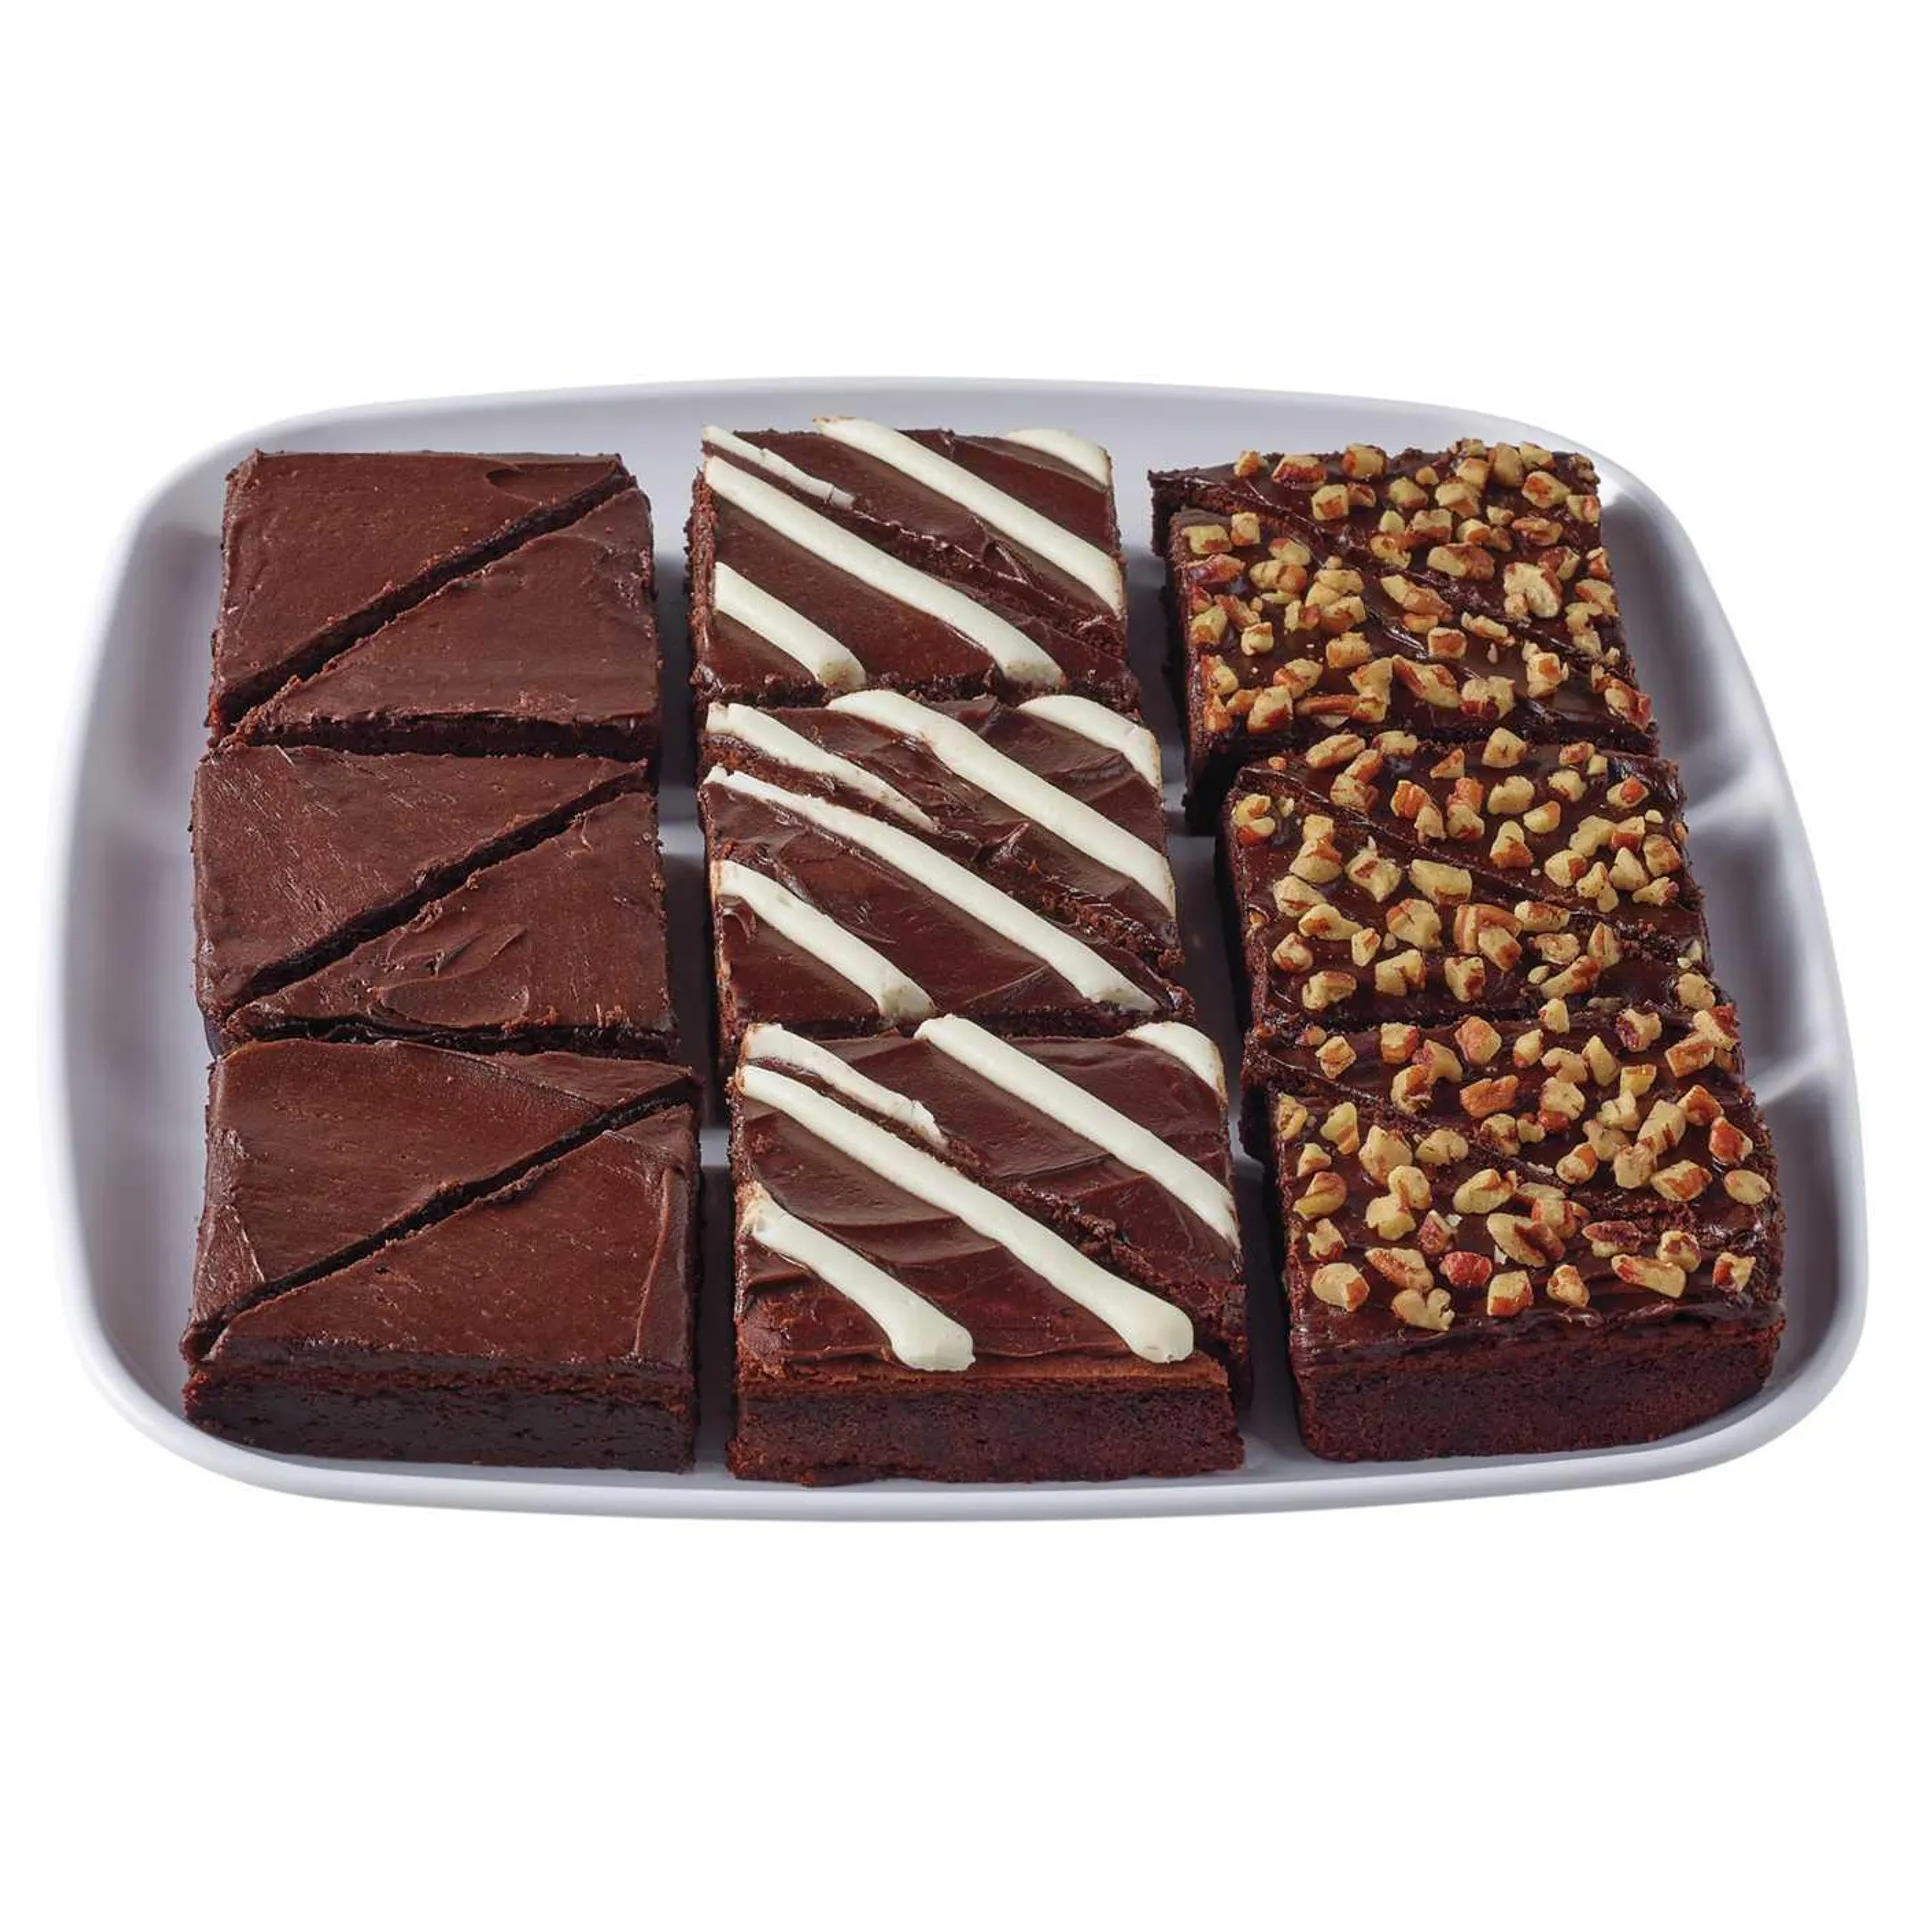 H‑E‑B Bakery Small Party Tray - Gourmet Brownies